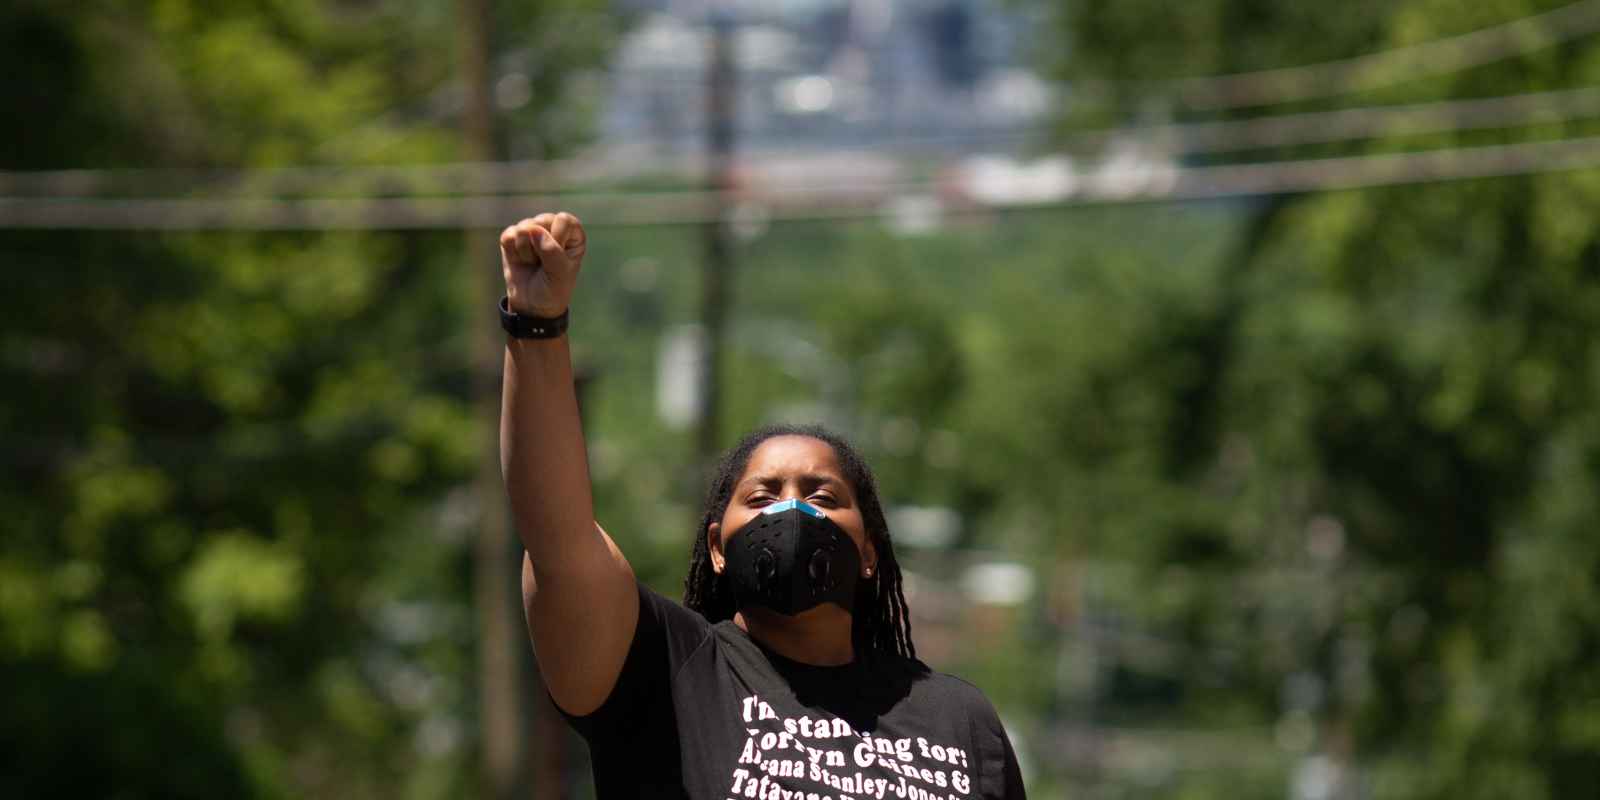 Black person with fist in the air wearing a t-shirt with the names of Black people killed by police